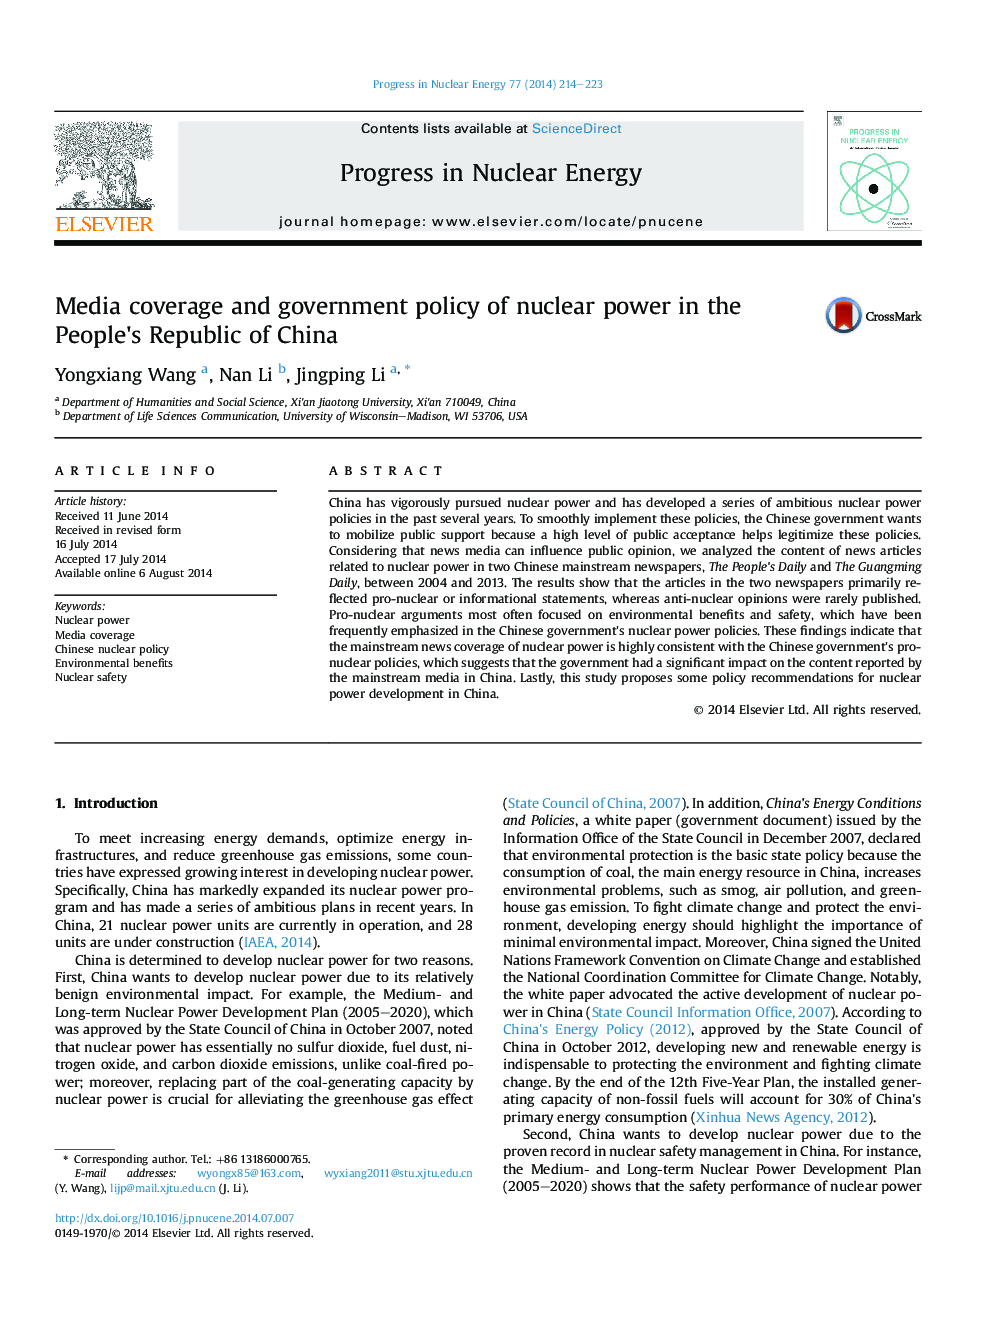 Media coverage and government policy of nuclear power in the People's Republic of China